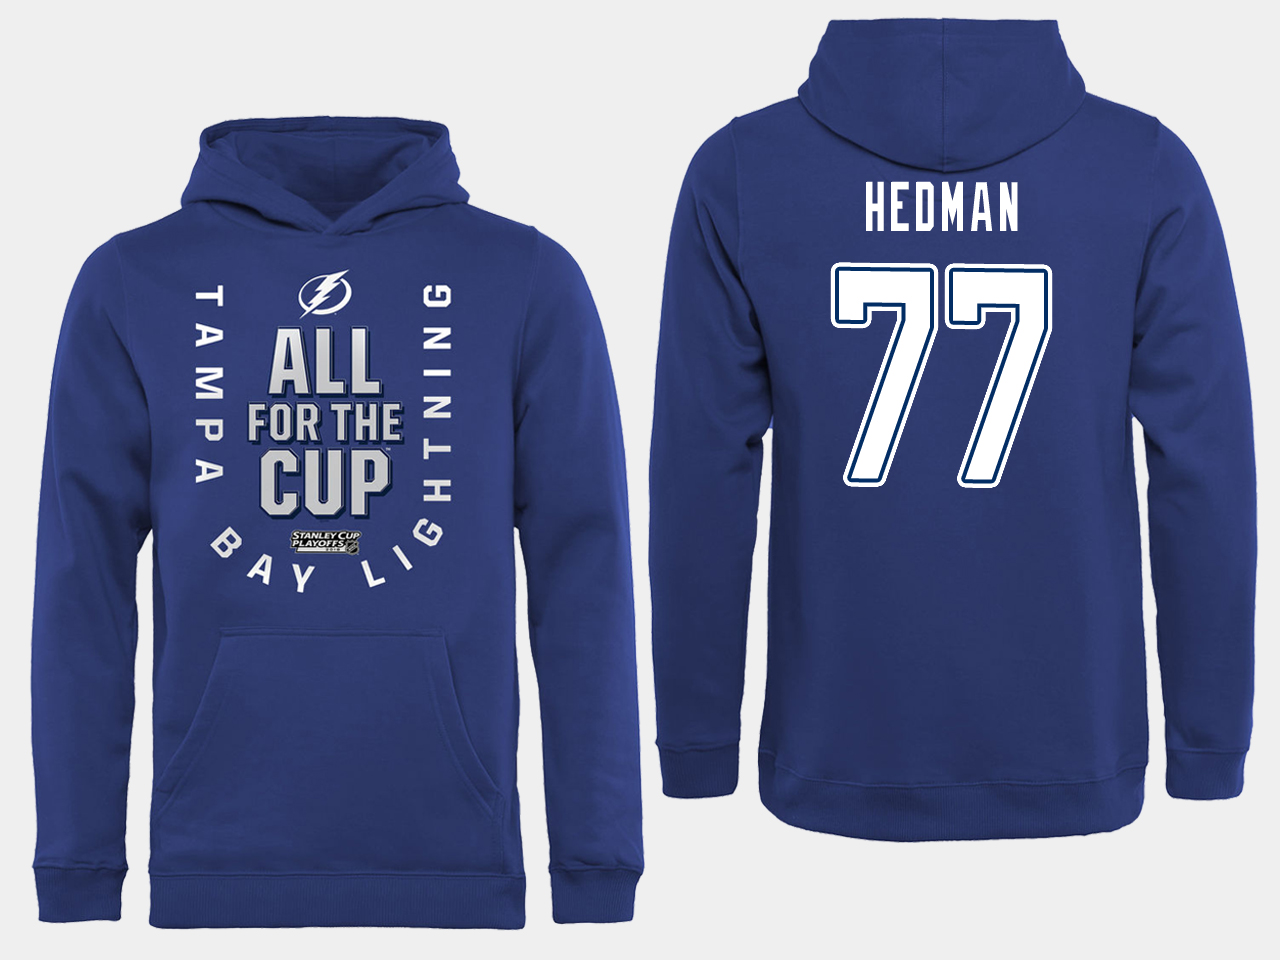 NHL Men adidas Tampa Bay Lightning 77 Hedman blue All for the Cup Hoodie